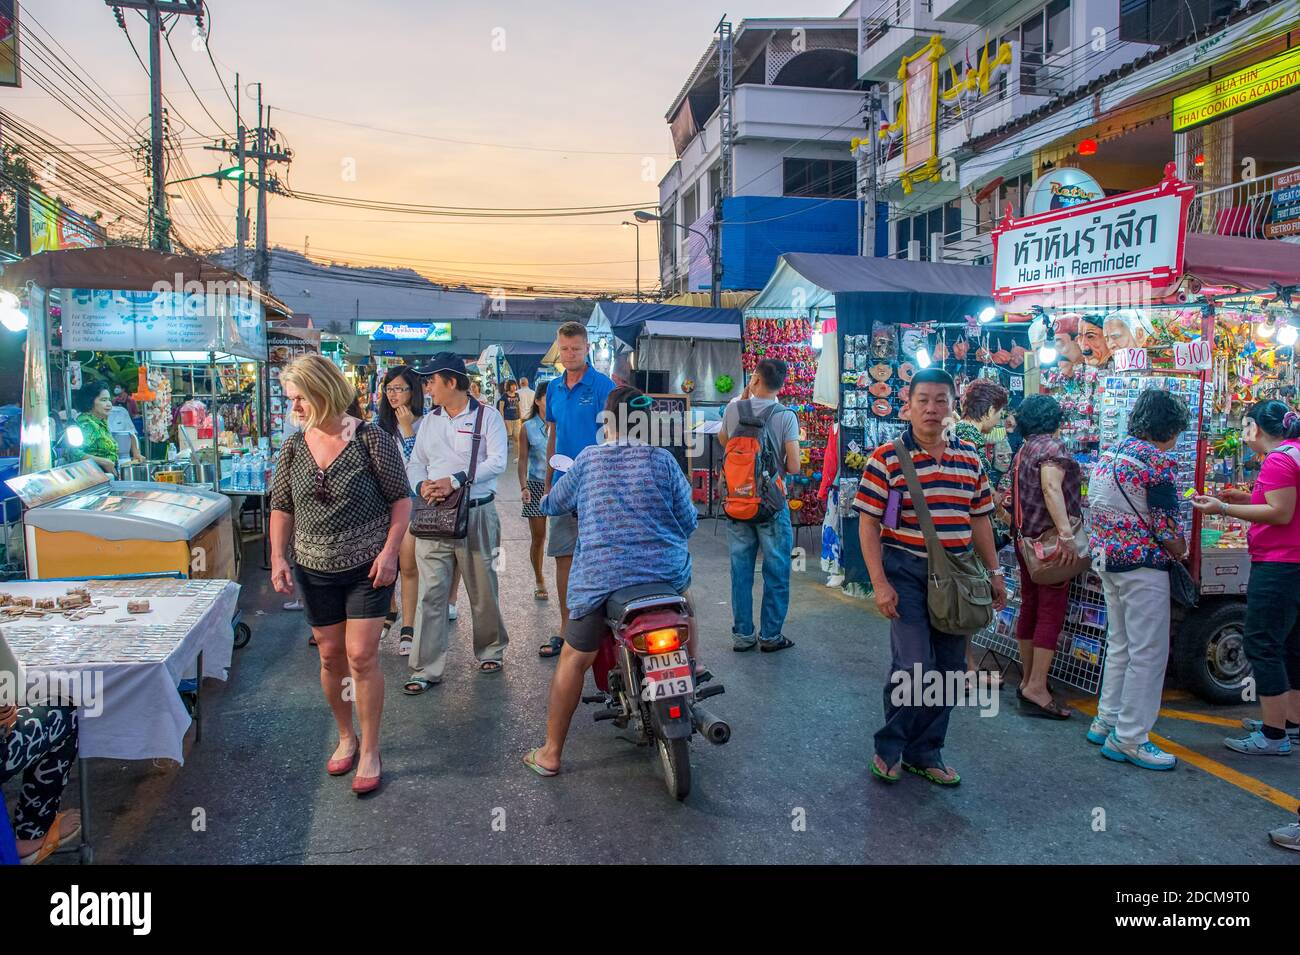 Urban scene from the famous night market in Hua Hin. Hua Hin is one of the most popular travel destinations in Thailand. Stock Photo